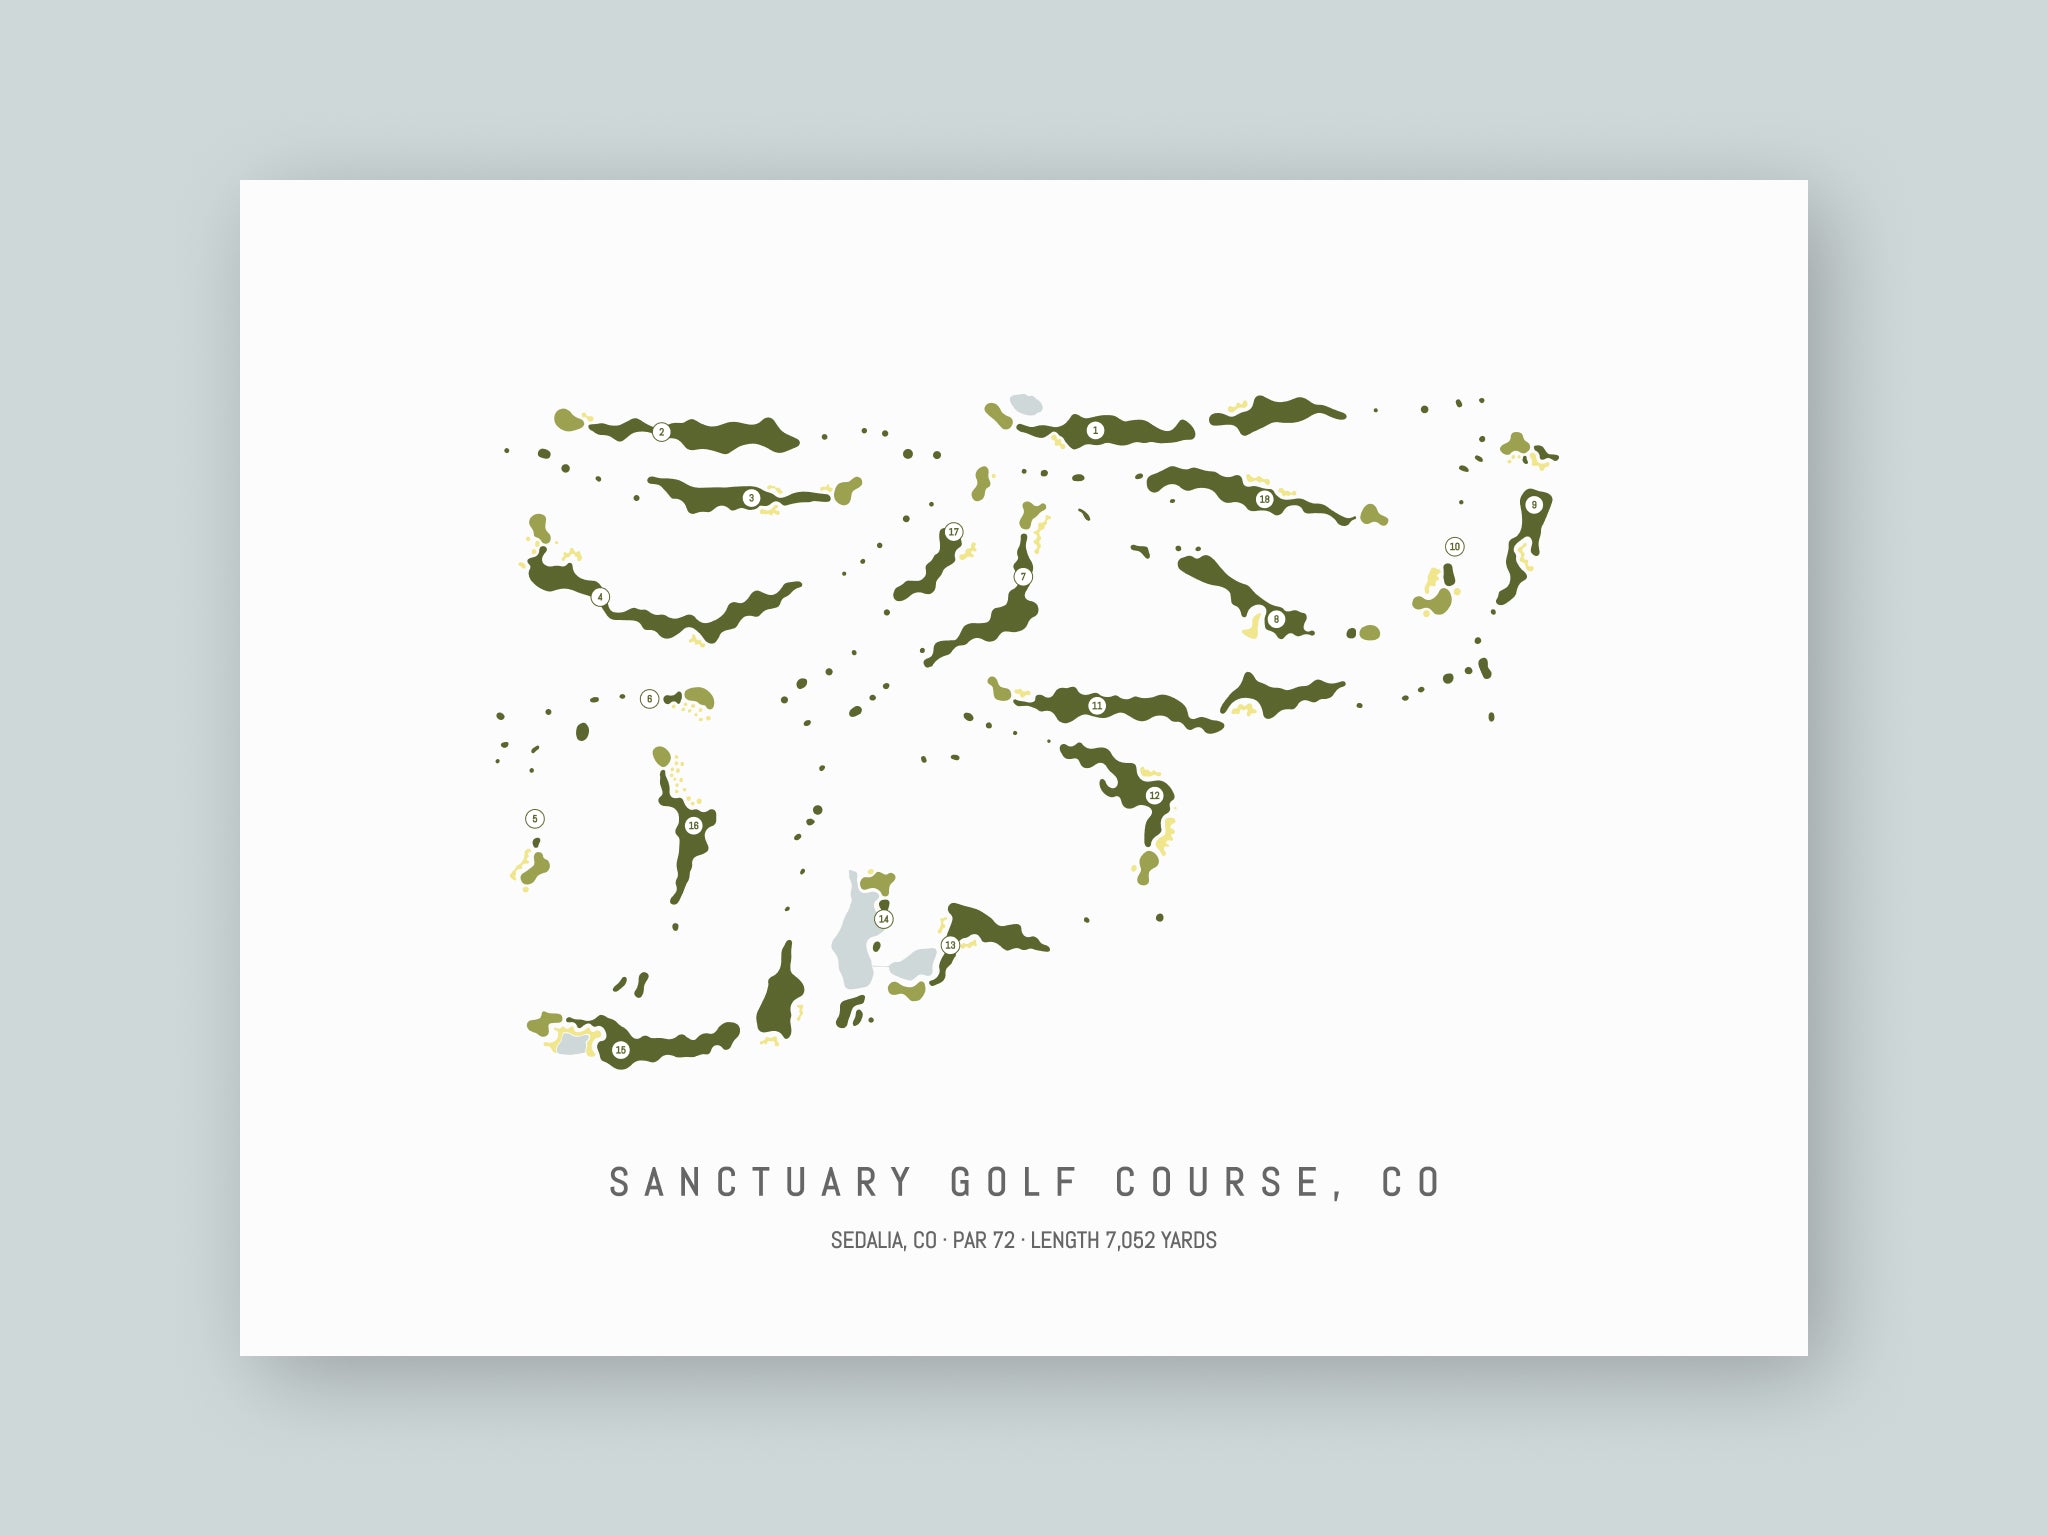 Sanctuary-Golf-Course-CO--Unframed-24x18-With-Hole-Numbers